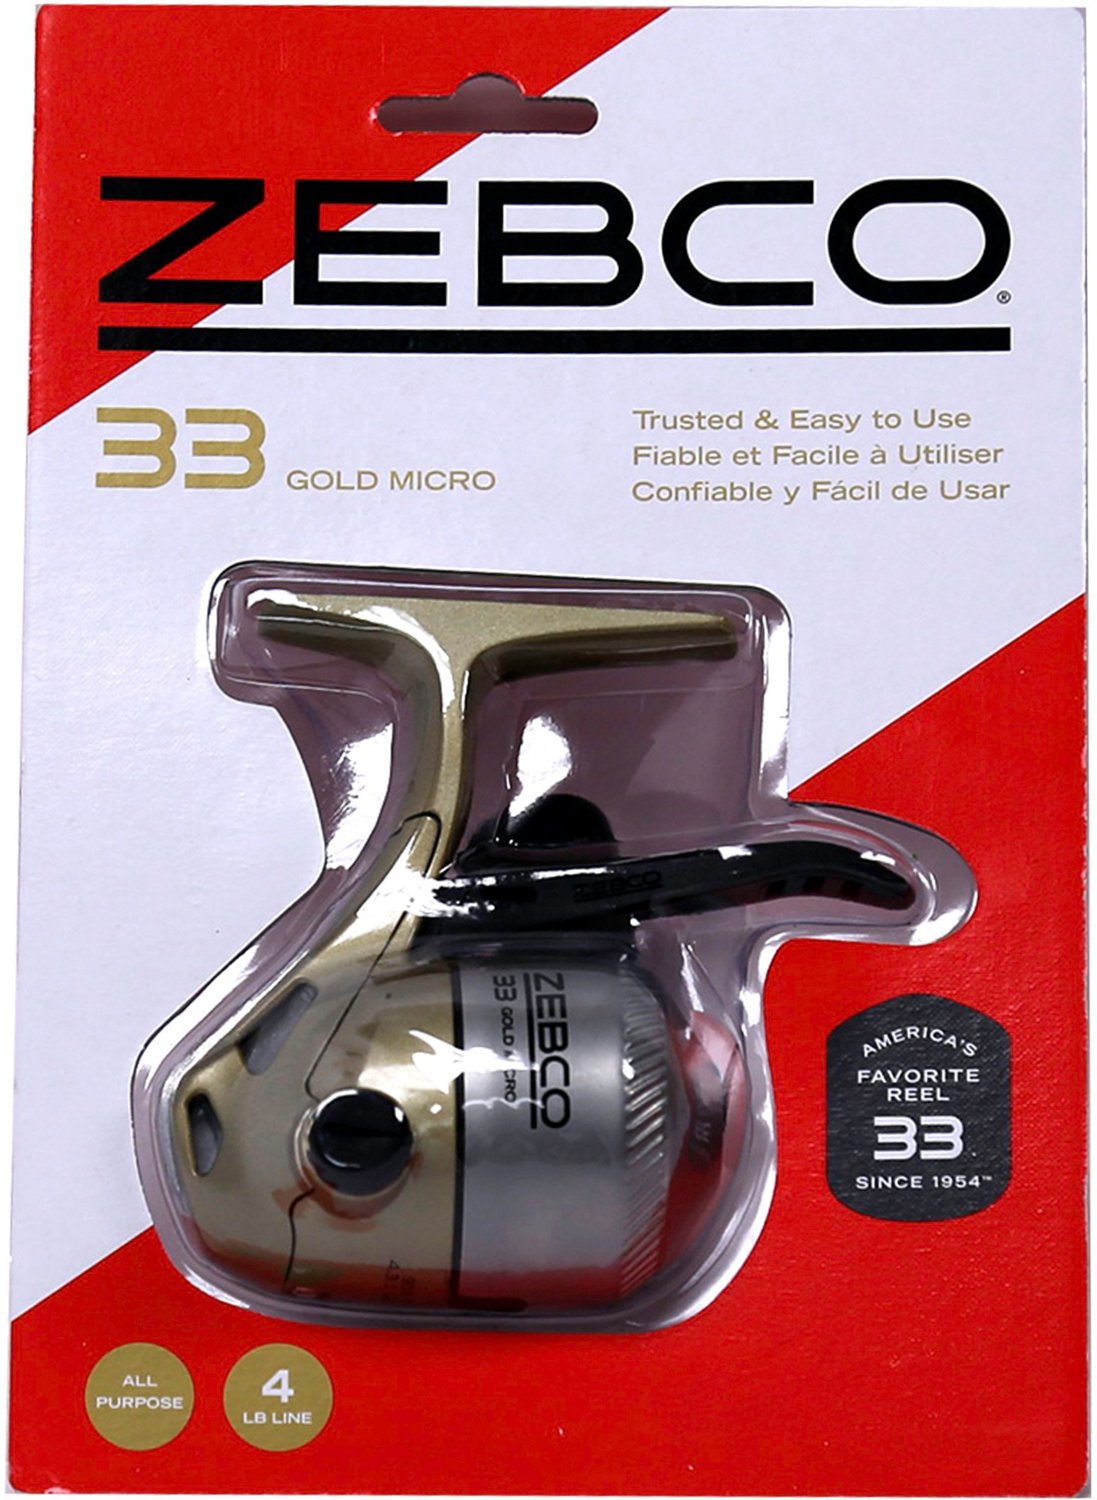 Zebco 33 Micro Gold Triggerspin Reel                                                                                             - view number 5